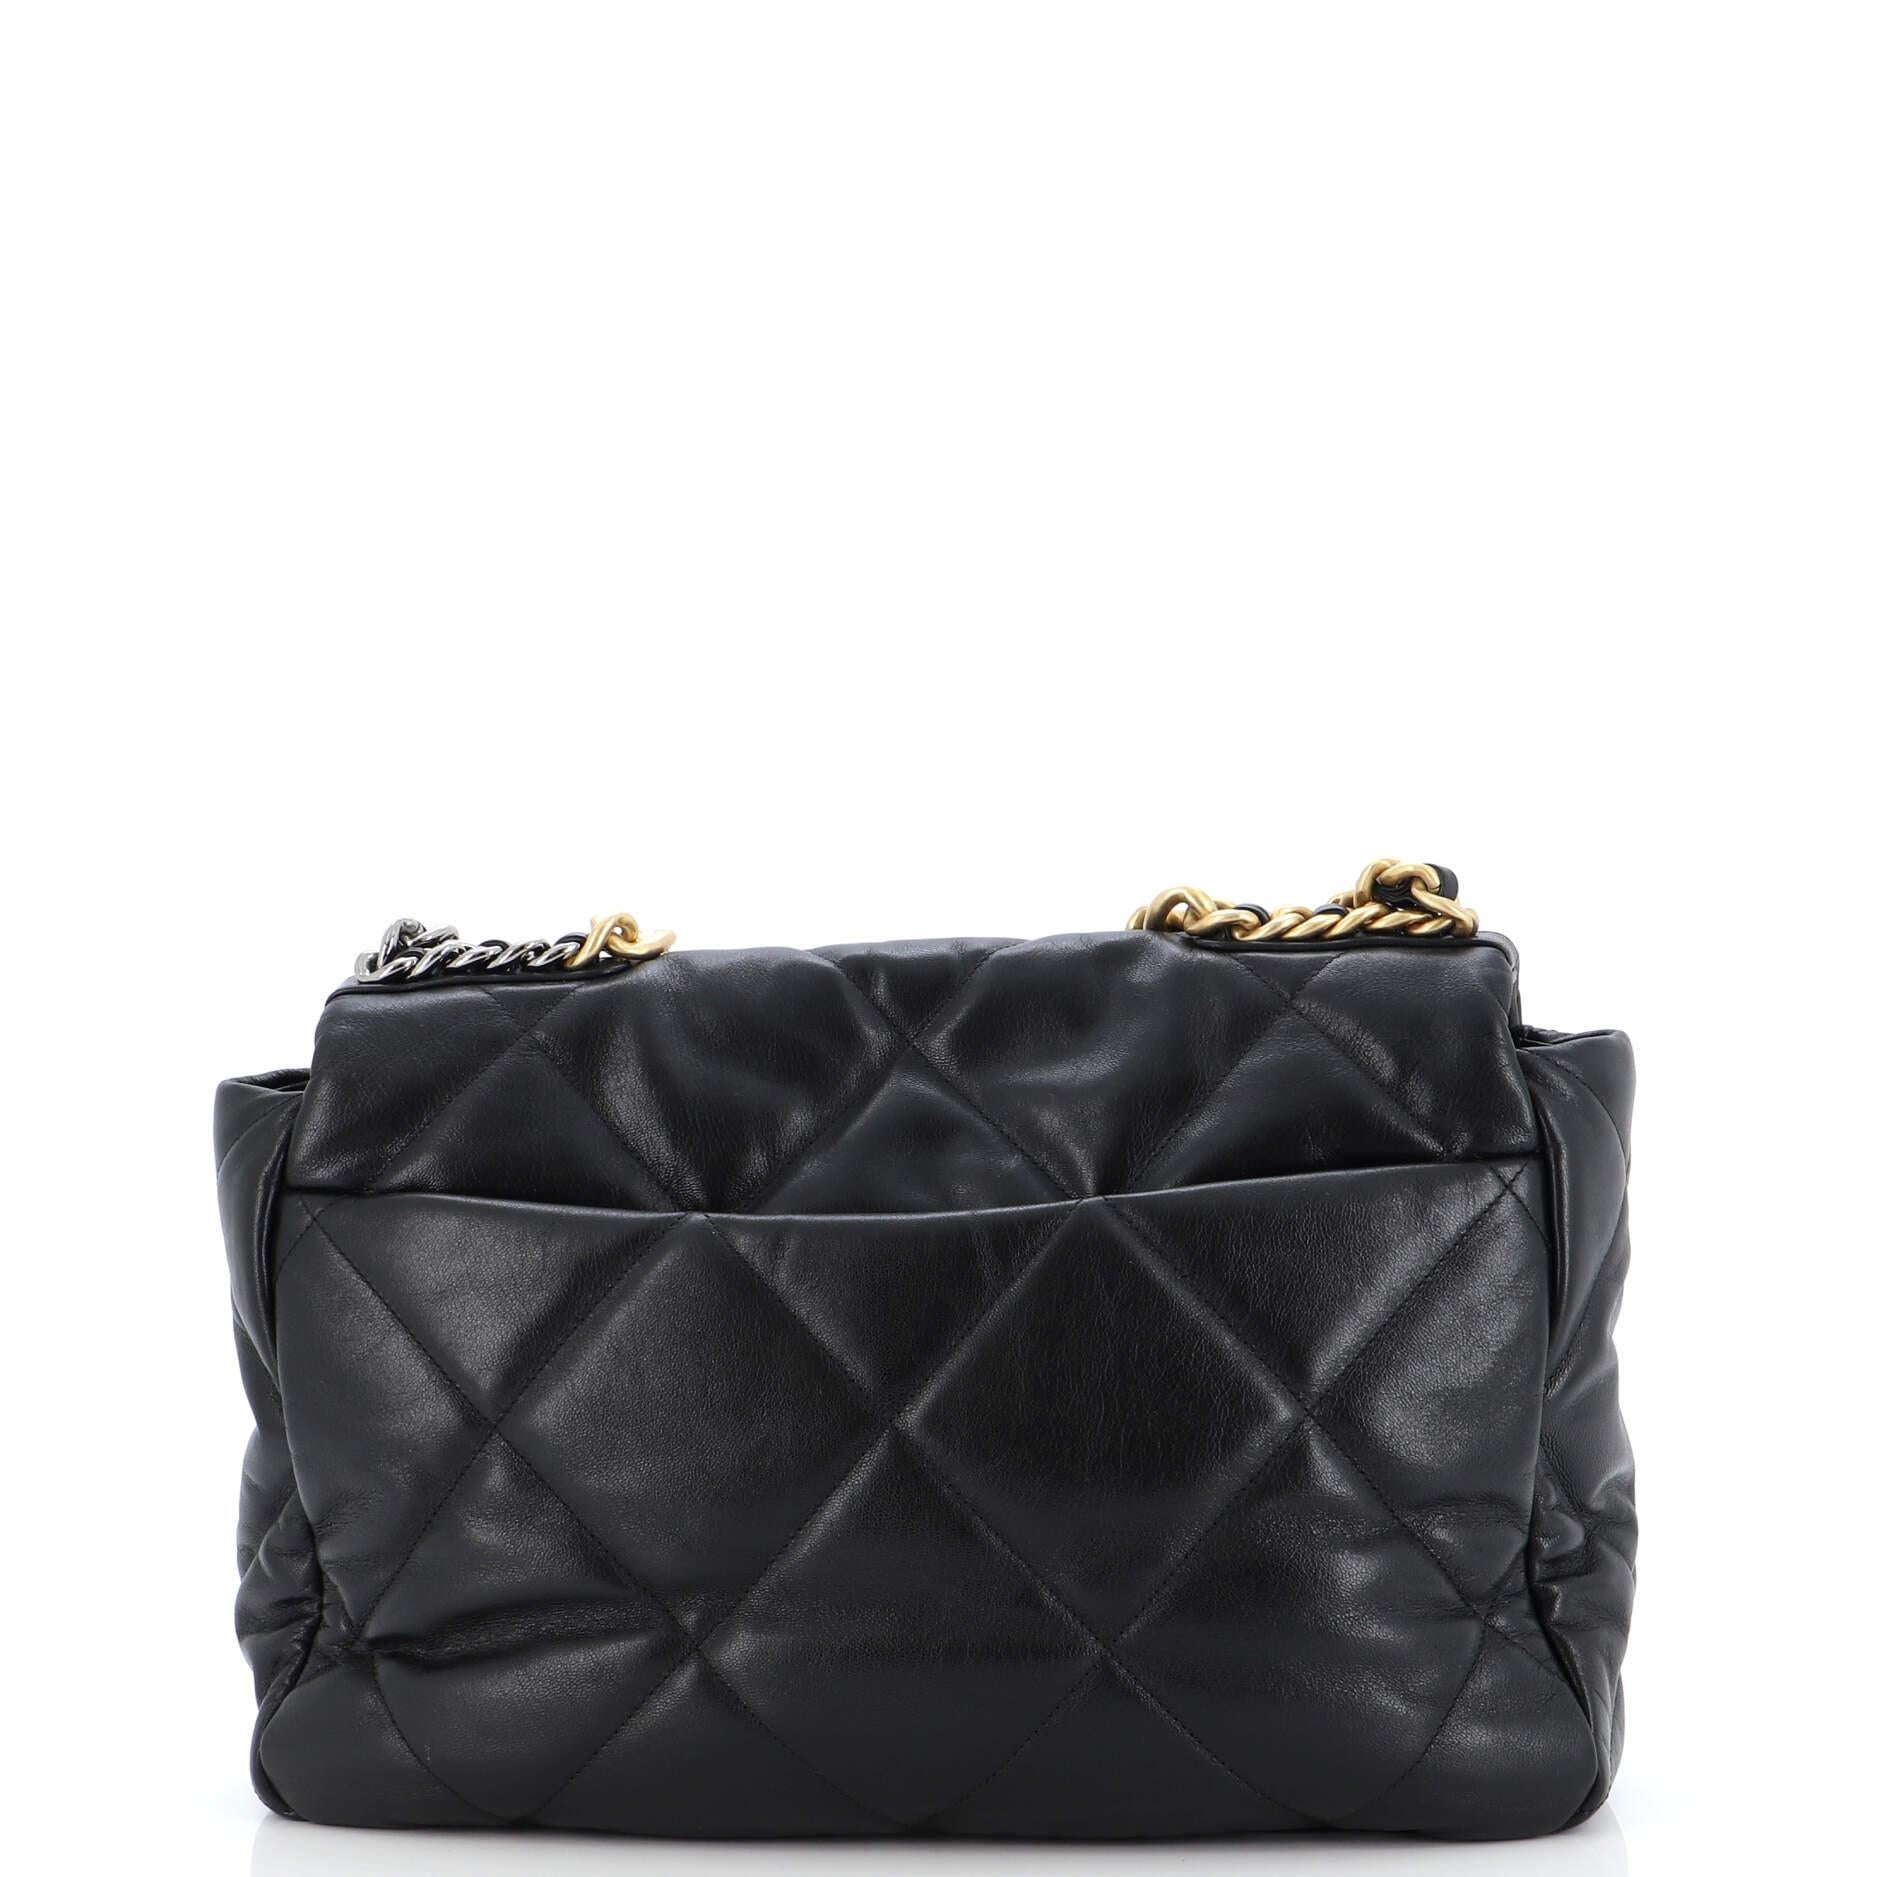 Women's or Men's Chanel 19 Flap Bag Quilted Leather Maxi